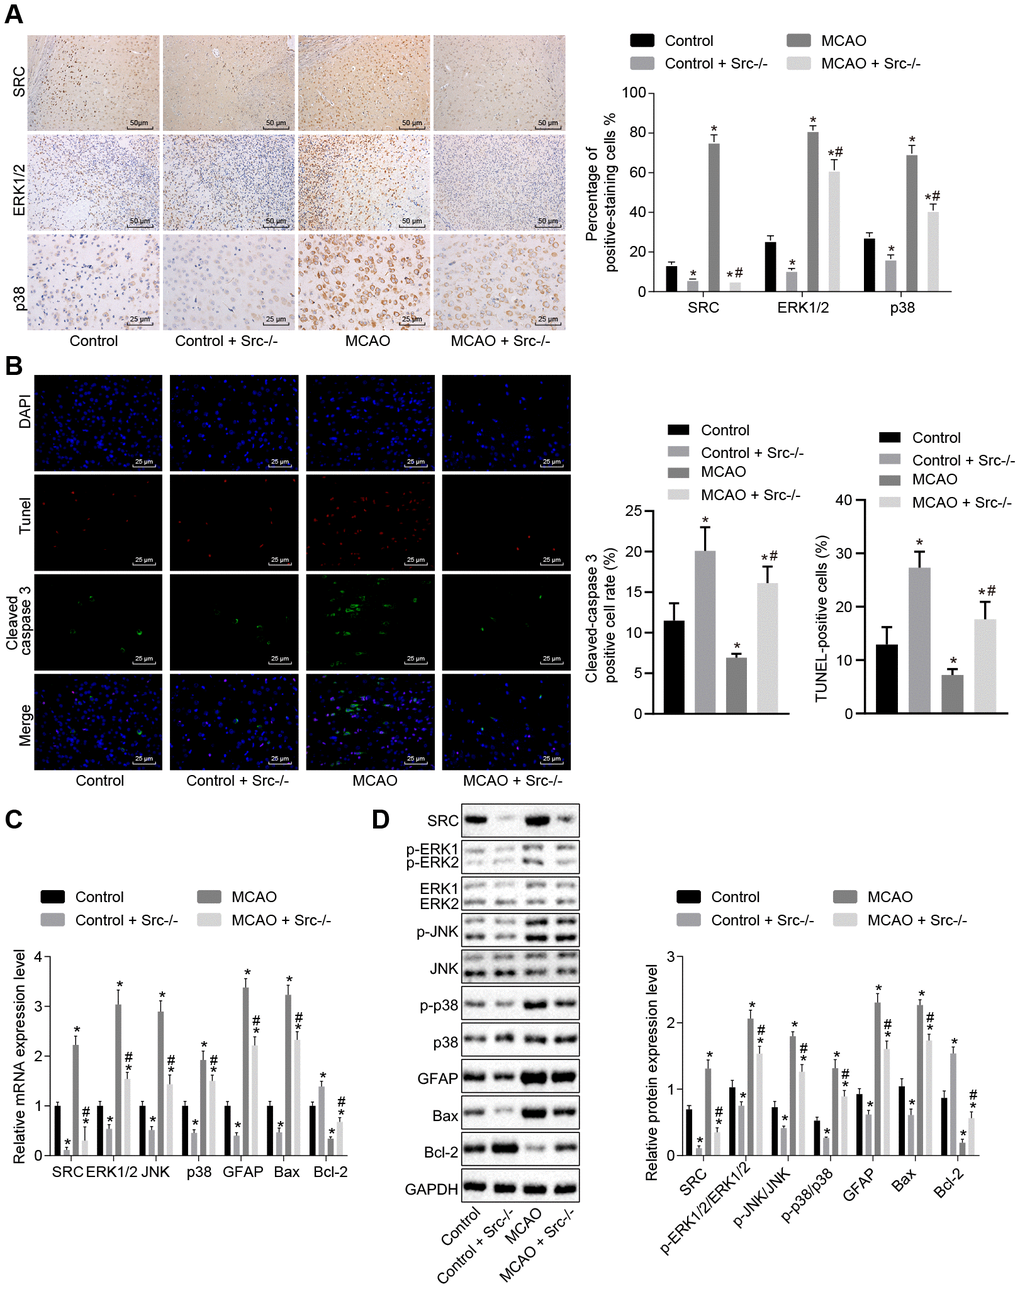 Src knockdown reduces cell apoptosis in brain tissues of MCAO mice by down-regulating the MAPK signaling pathway. (A) Immunohistochemistry of ERK1/2 (× 400), p38 (× 400) and Src (× 200) in the brain tissues of Src-/- mice; (B) diagram based on the immunofluorescence of cleaved caspase 3, TUNEL staining, and DAPI in brain tissues of Src-/- mice (× 400); (C) mRNA expression of Erk2, Jnk, p38, Gfap, Bax and Bcl-2 in brain tissues of Src-/- mice using RT-qPCR; (D) protein level of GFAP, Bax and Bcl-2 along with the extent of ERK1/2, JNK and p38 phosphorylation in brain tissues of Src-/- mice using Western blot analysis. Measurement data are expressed as mean ± standard deviation and compared using one-way ANOVA, followed by Tukey's post hoc test. * p vs. control group (sham-operated wild-type mice); # p vs. MCAO group (wild-type mouse models of MCAO). N = 15.